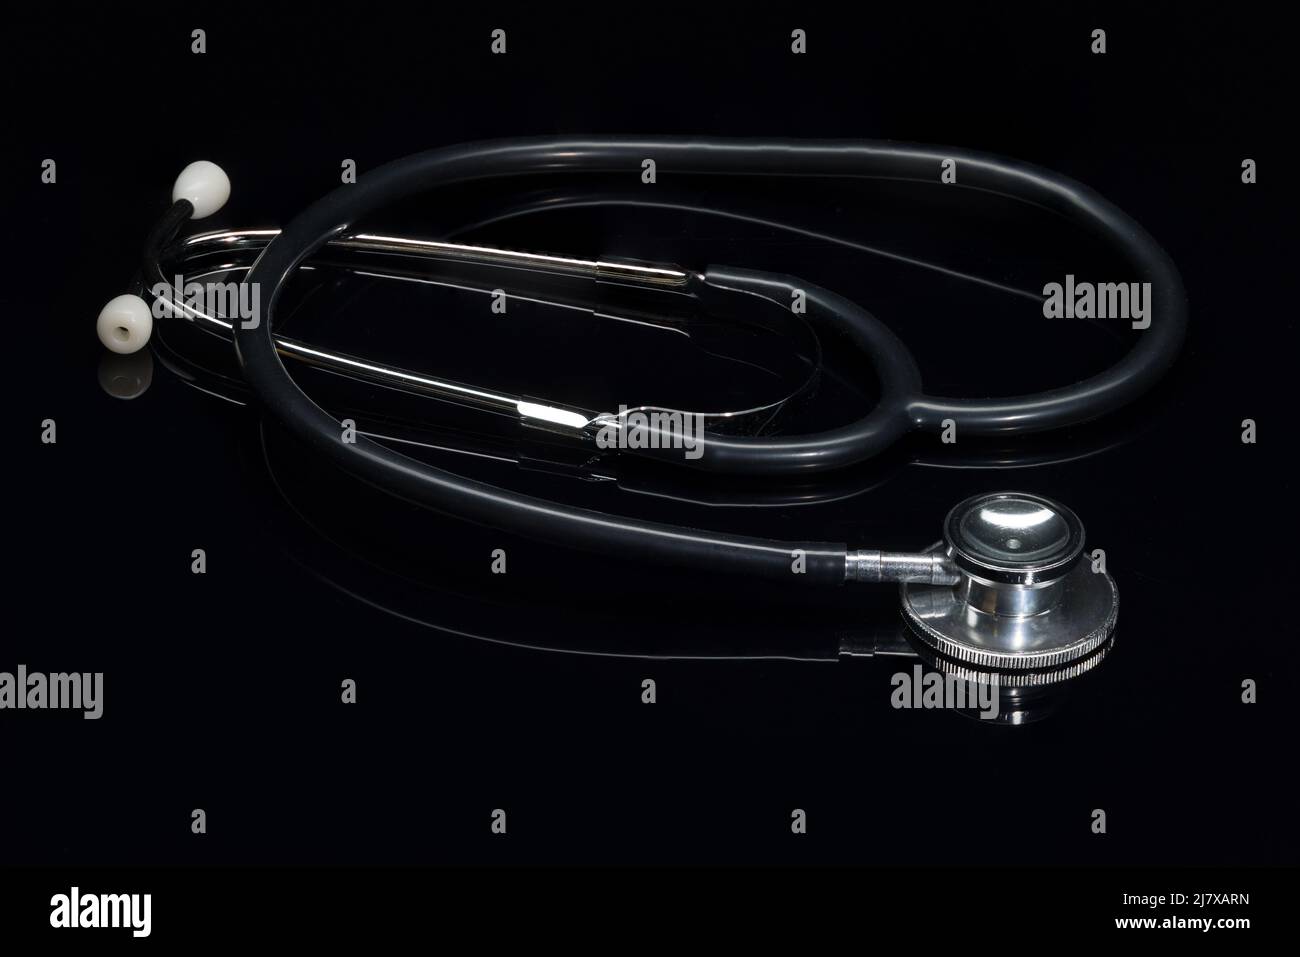 close-up of a stethoscope on a black shiny surface Stock Photo